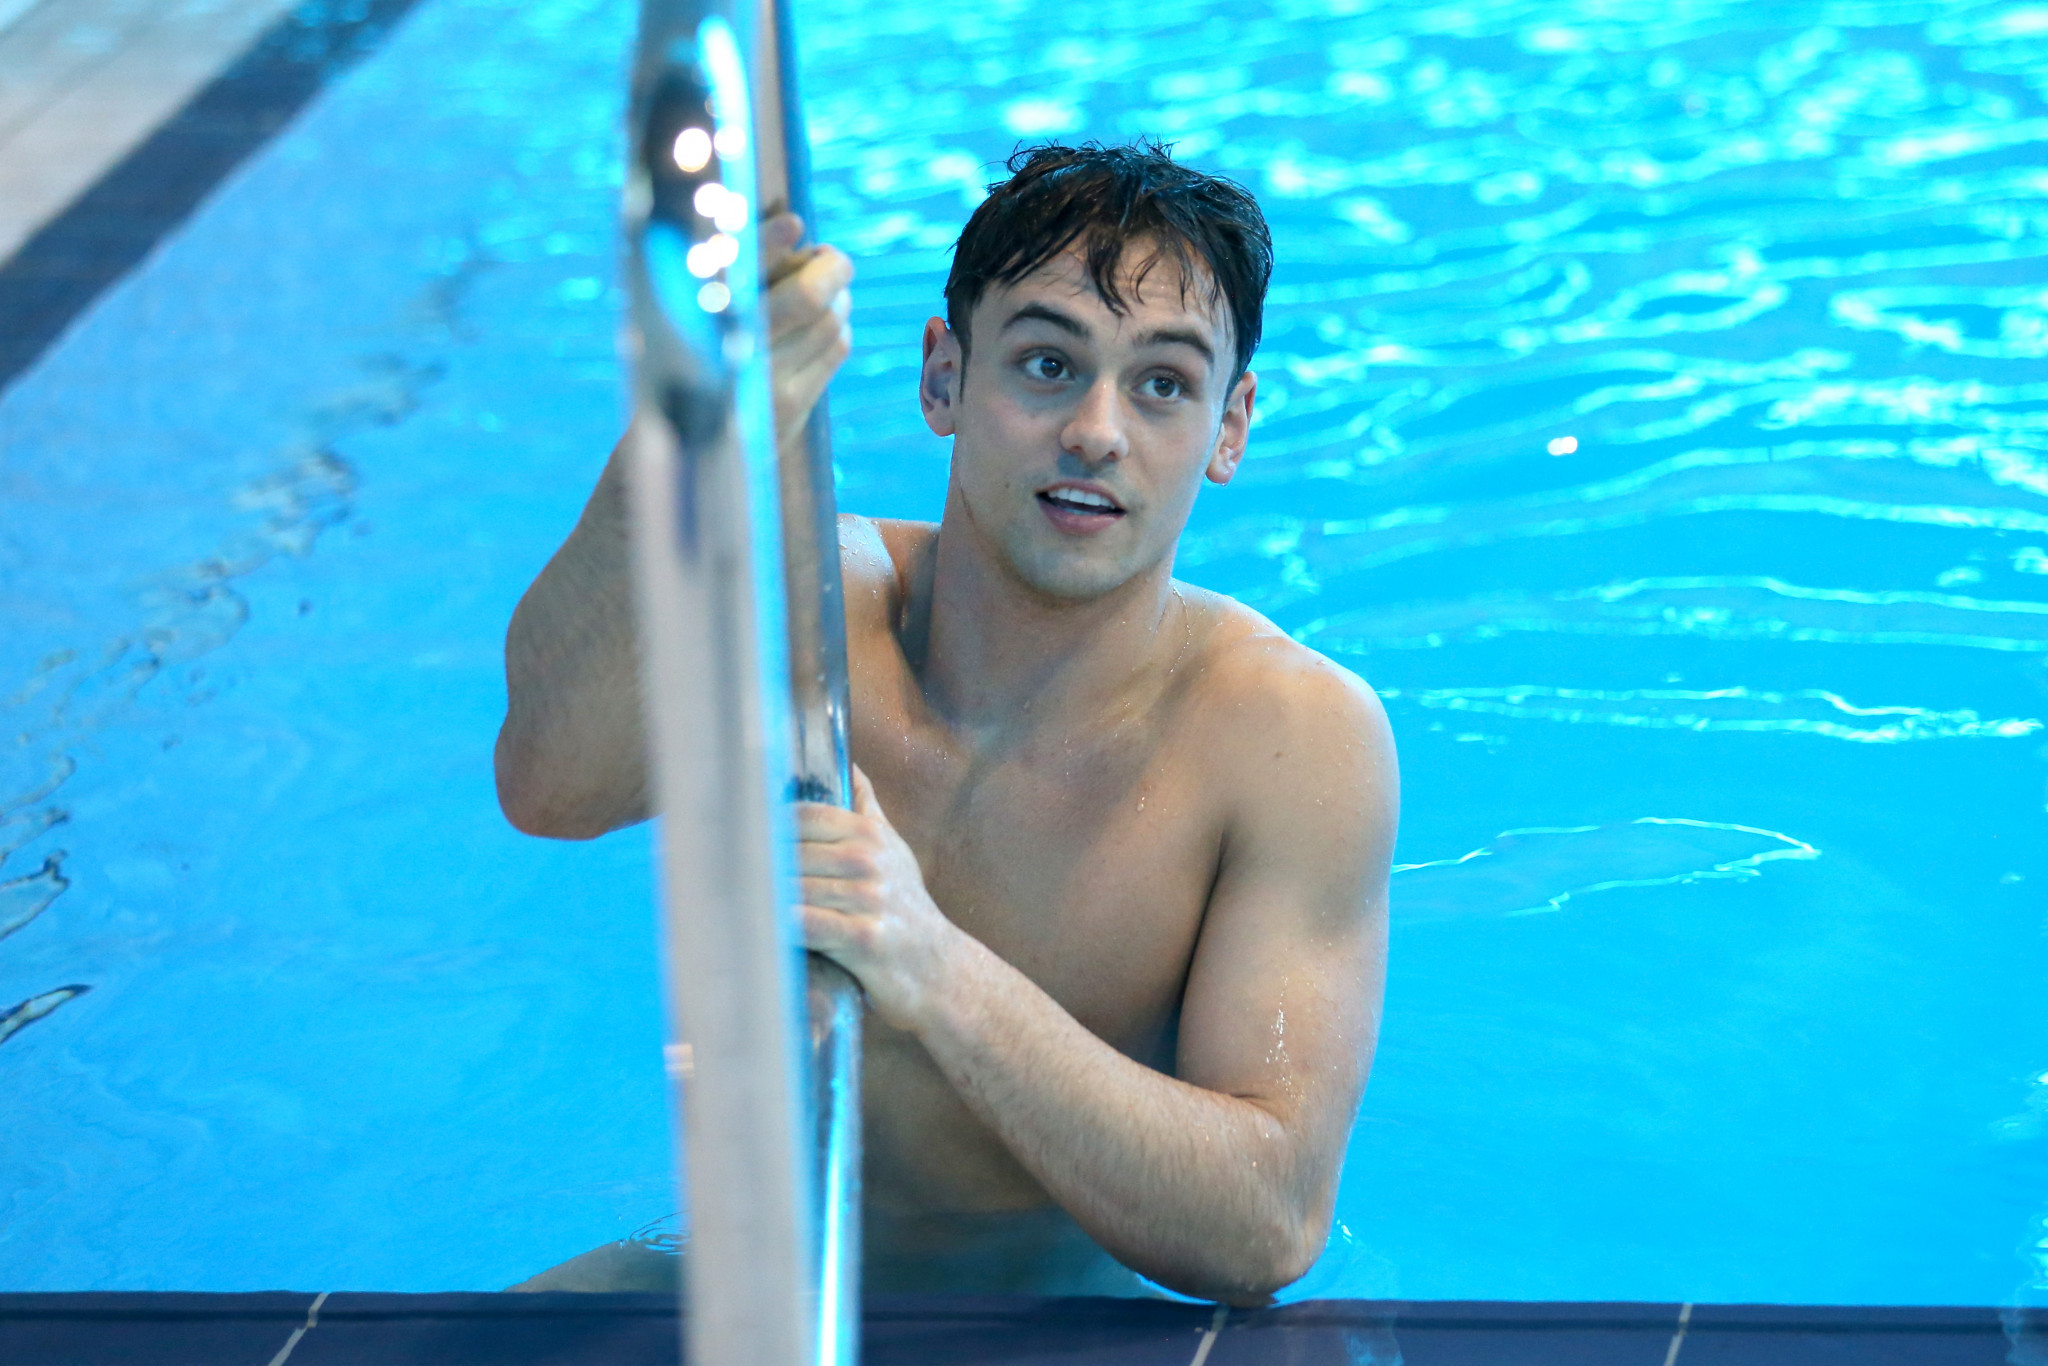 Britain's Tom Daley hopes to round off a successful FINA Diving World Series with further success in his home pool tomorrow ©Getty Images